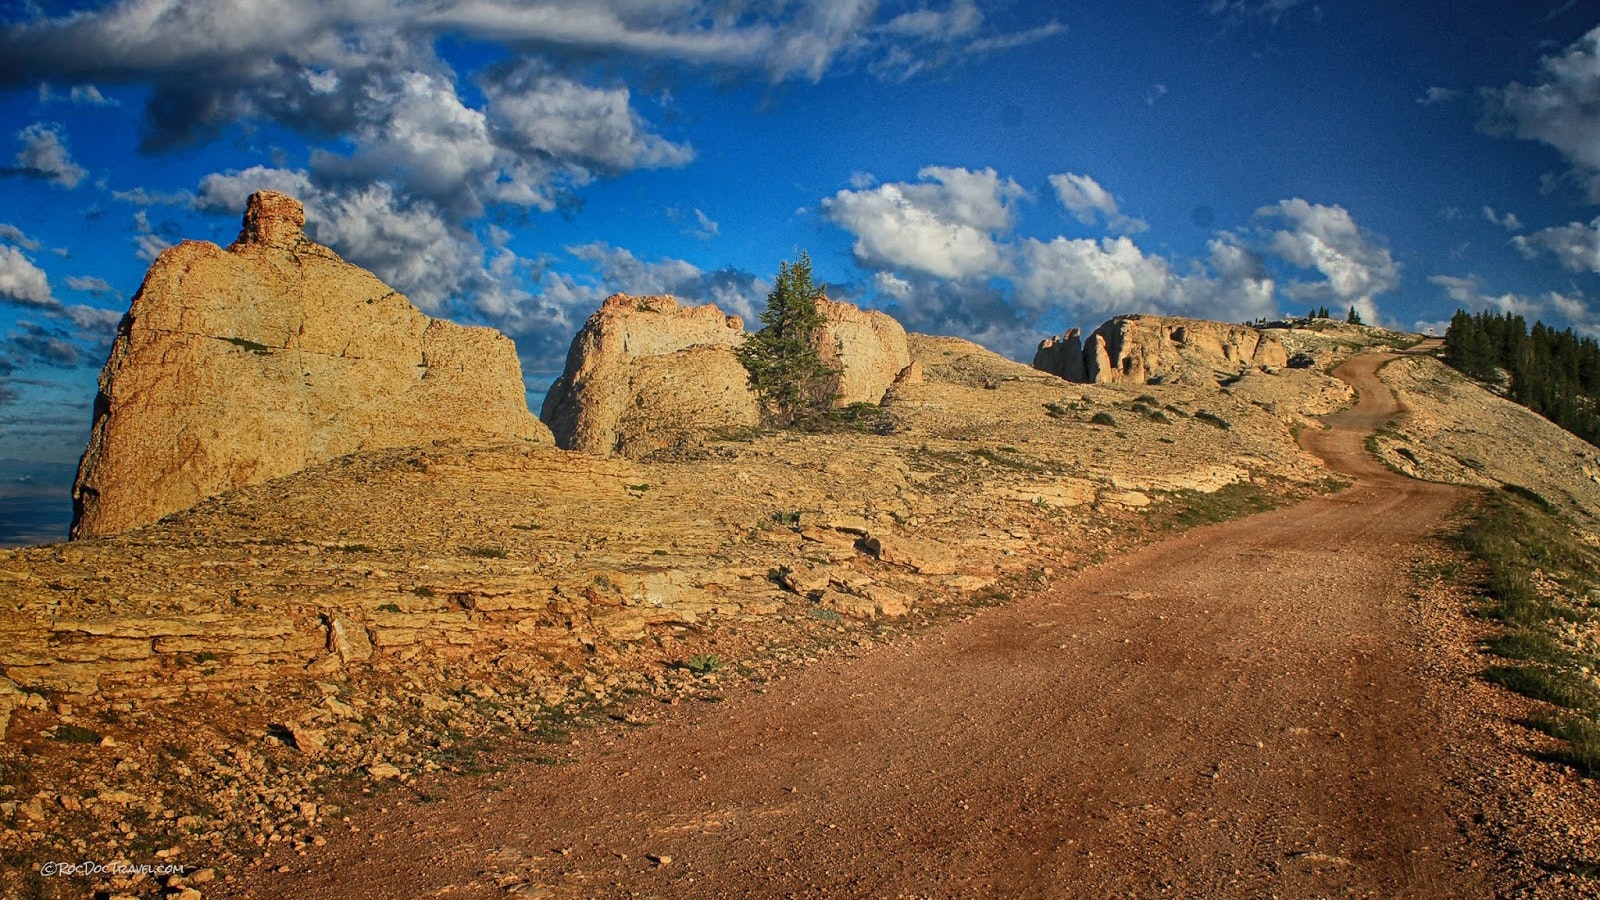 A view from the road leading to the Medicine Wheel. It is about a 1.5-mile hike from the parking area.